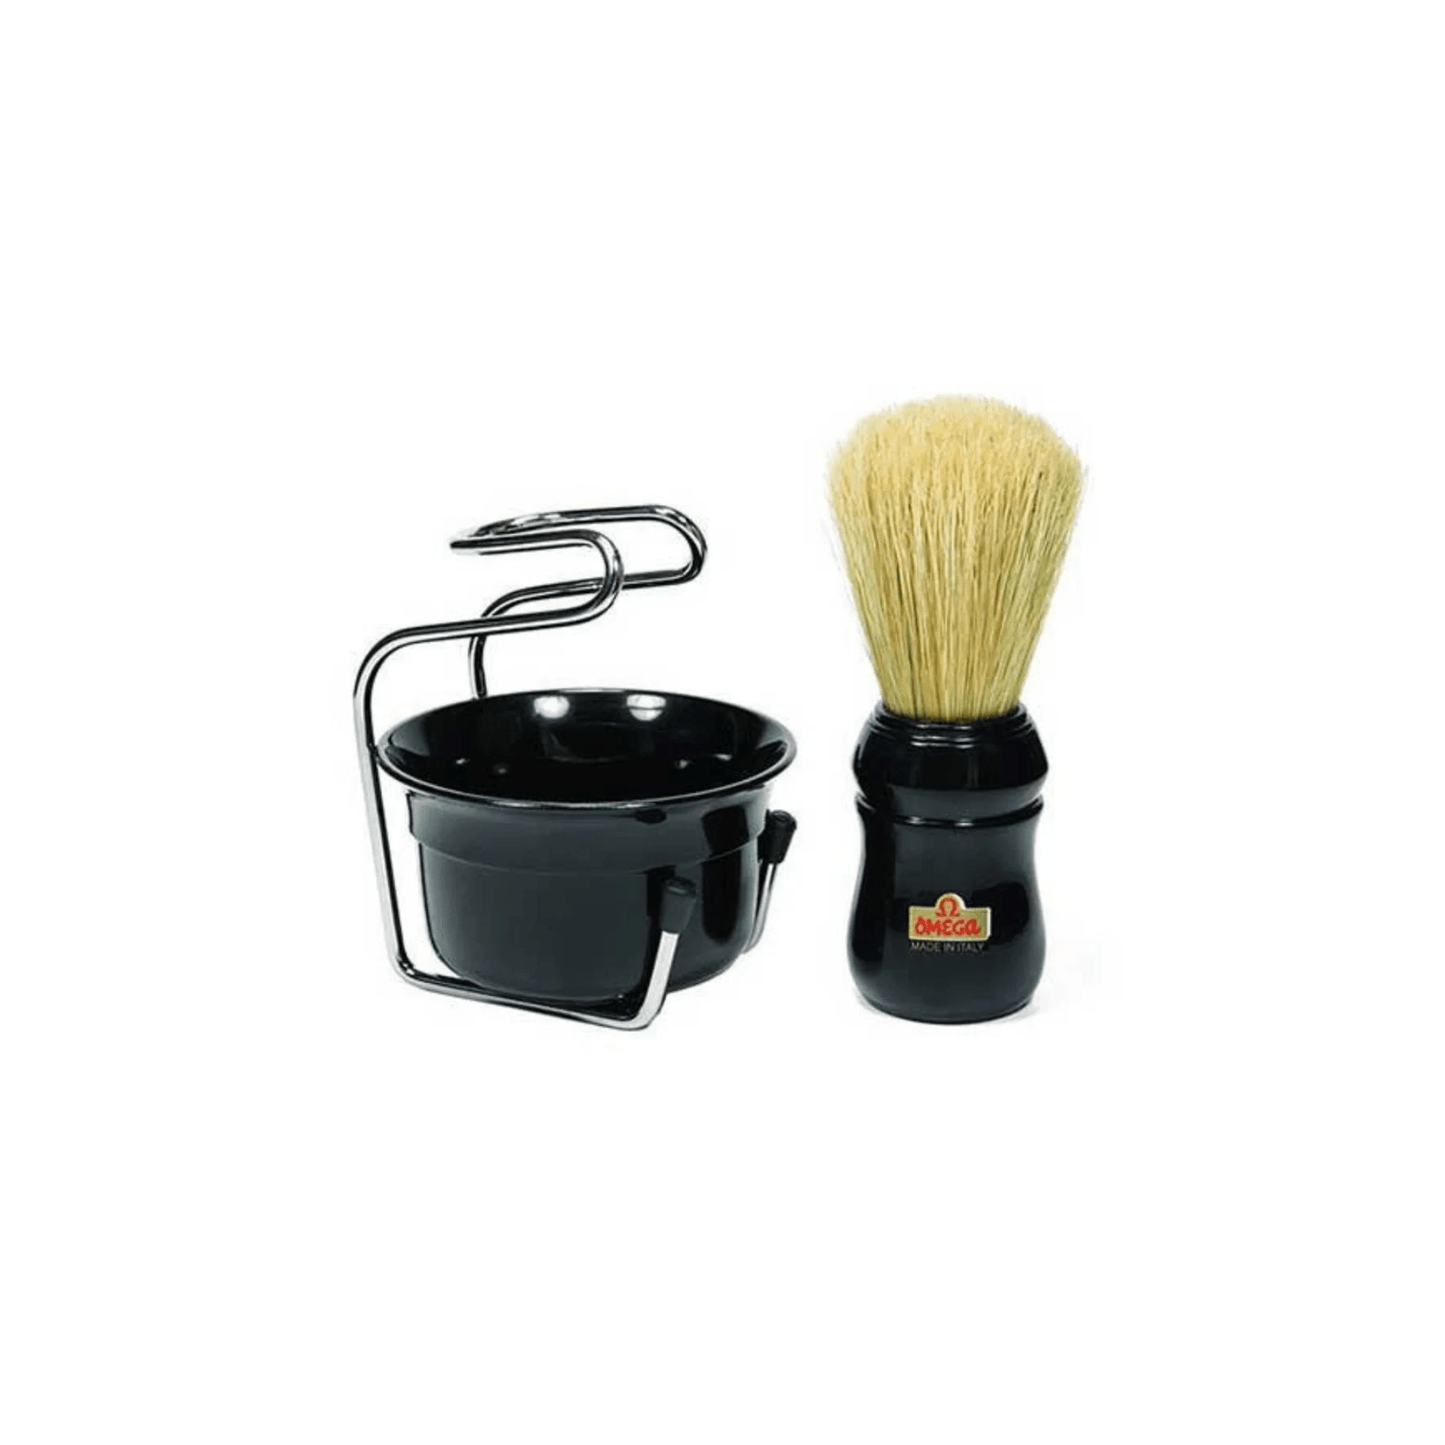 Primary Image of Omega Black Professional Brush, Stand and Bowl Set